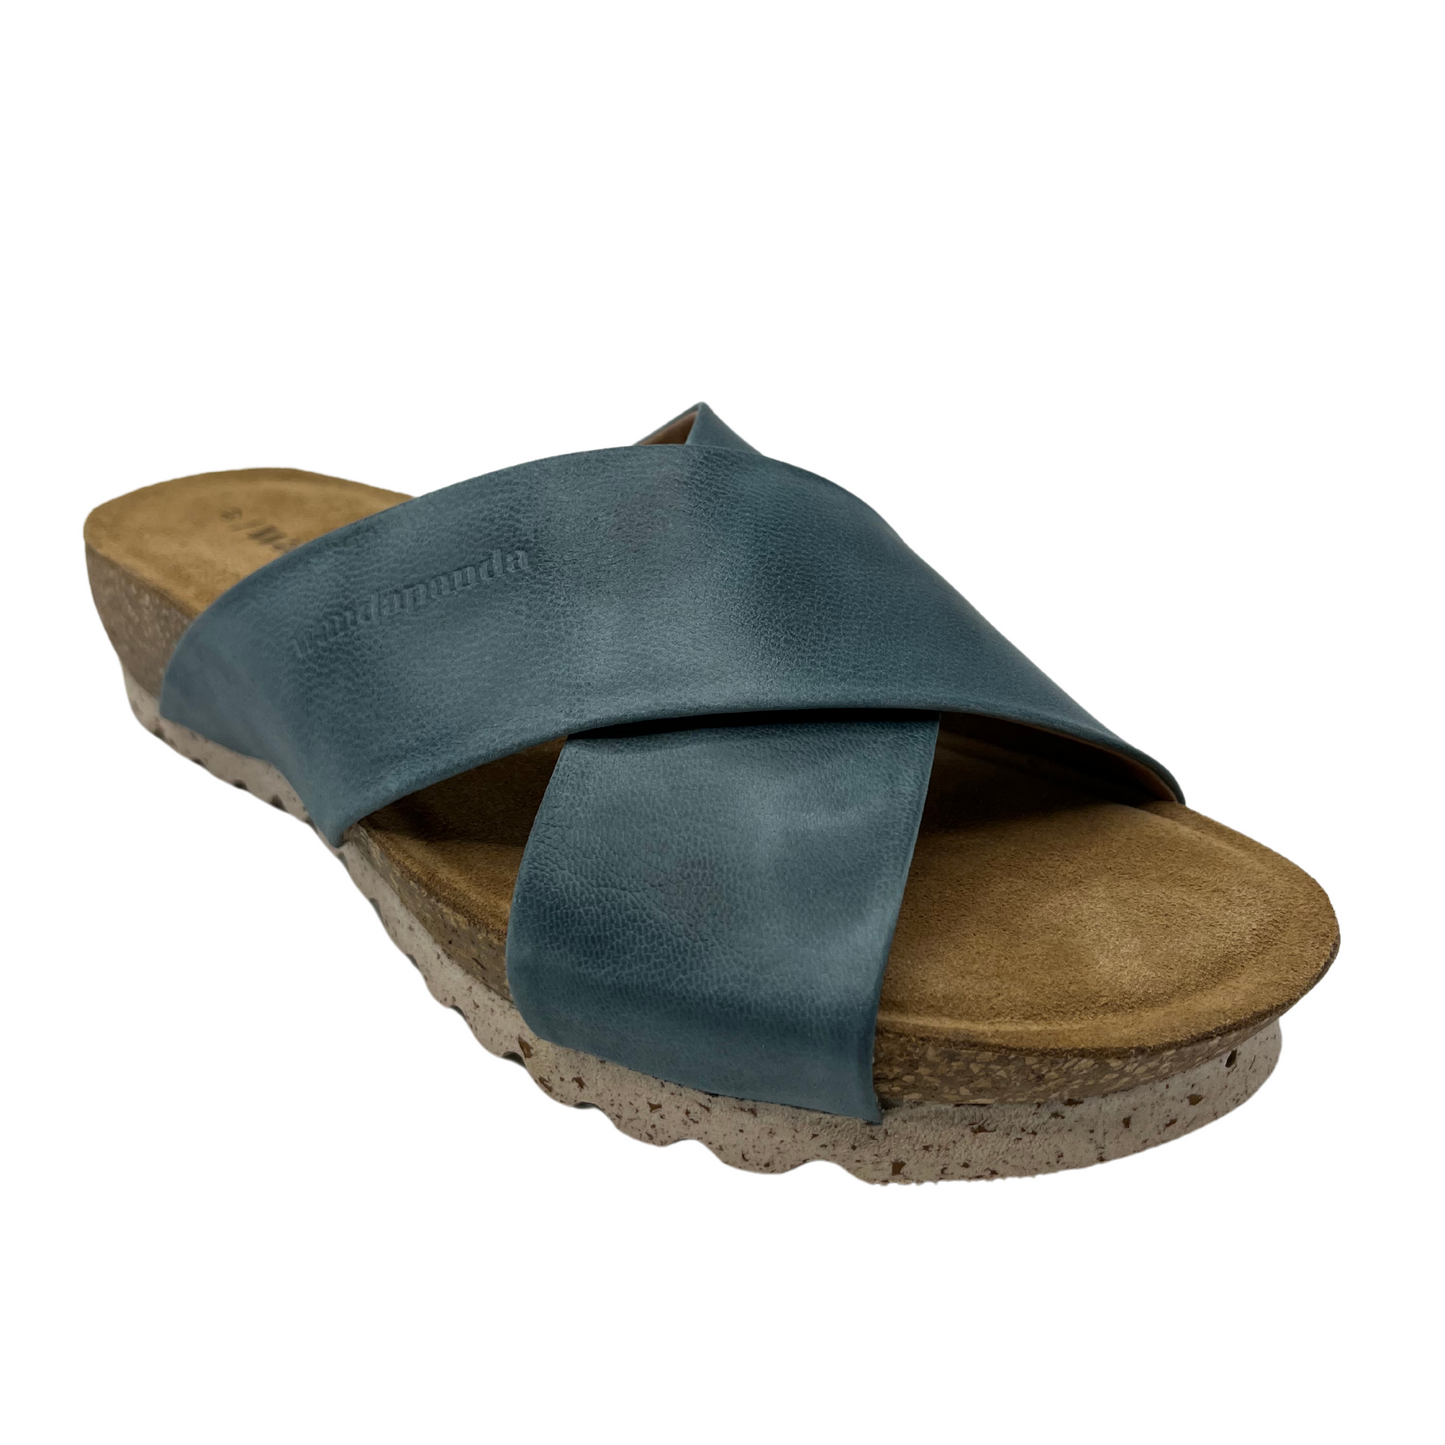 45 degree angled view of sandal with blue leather straps